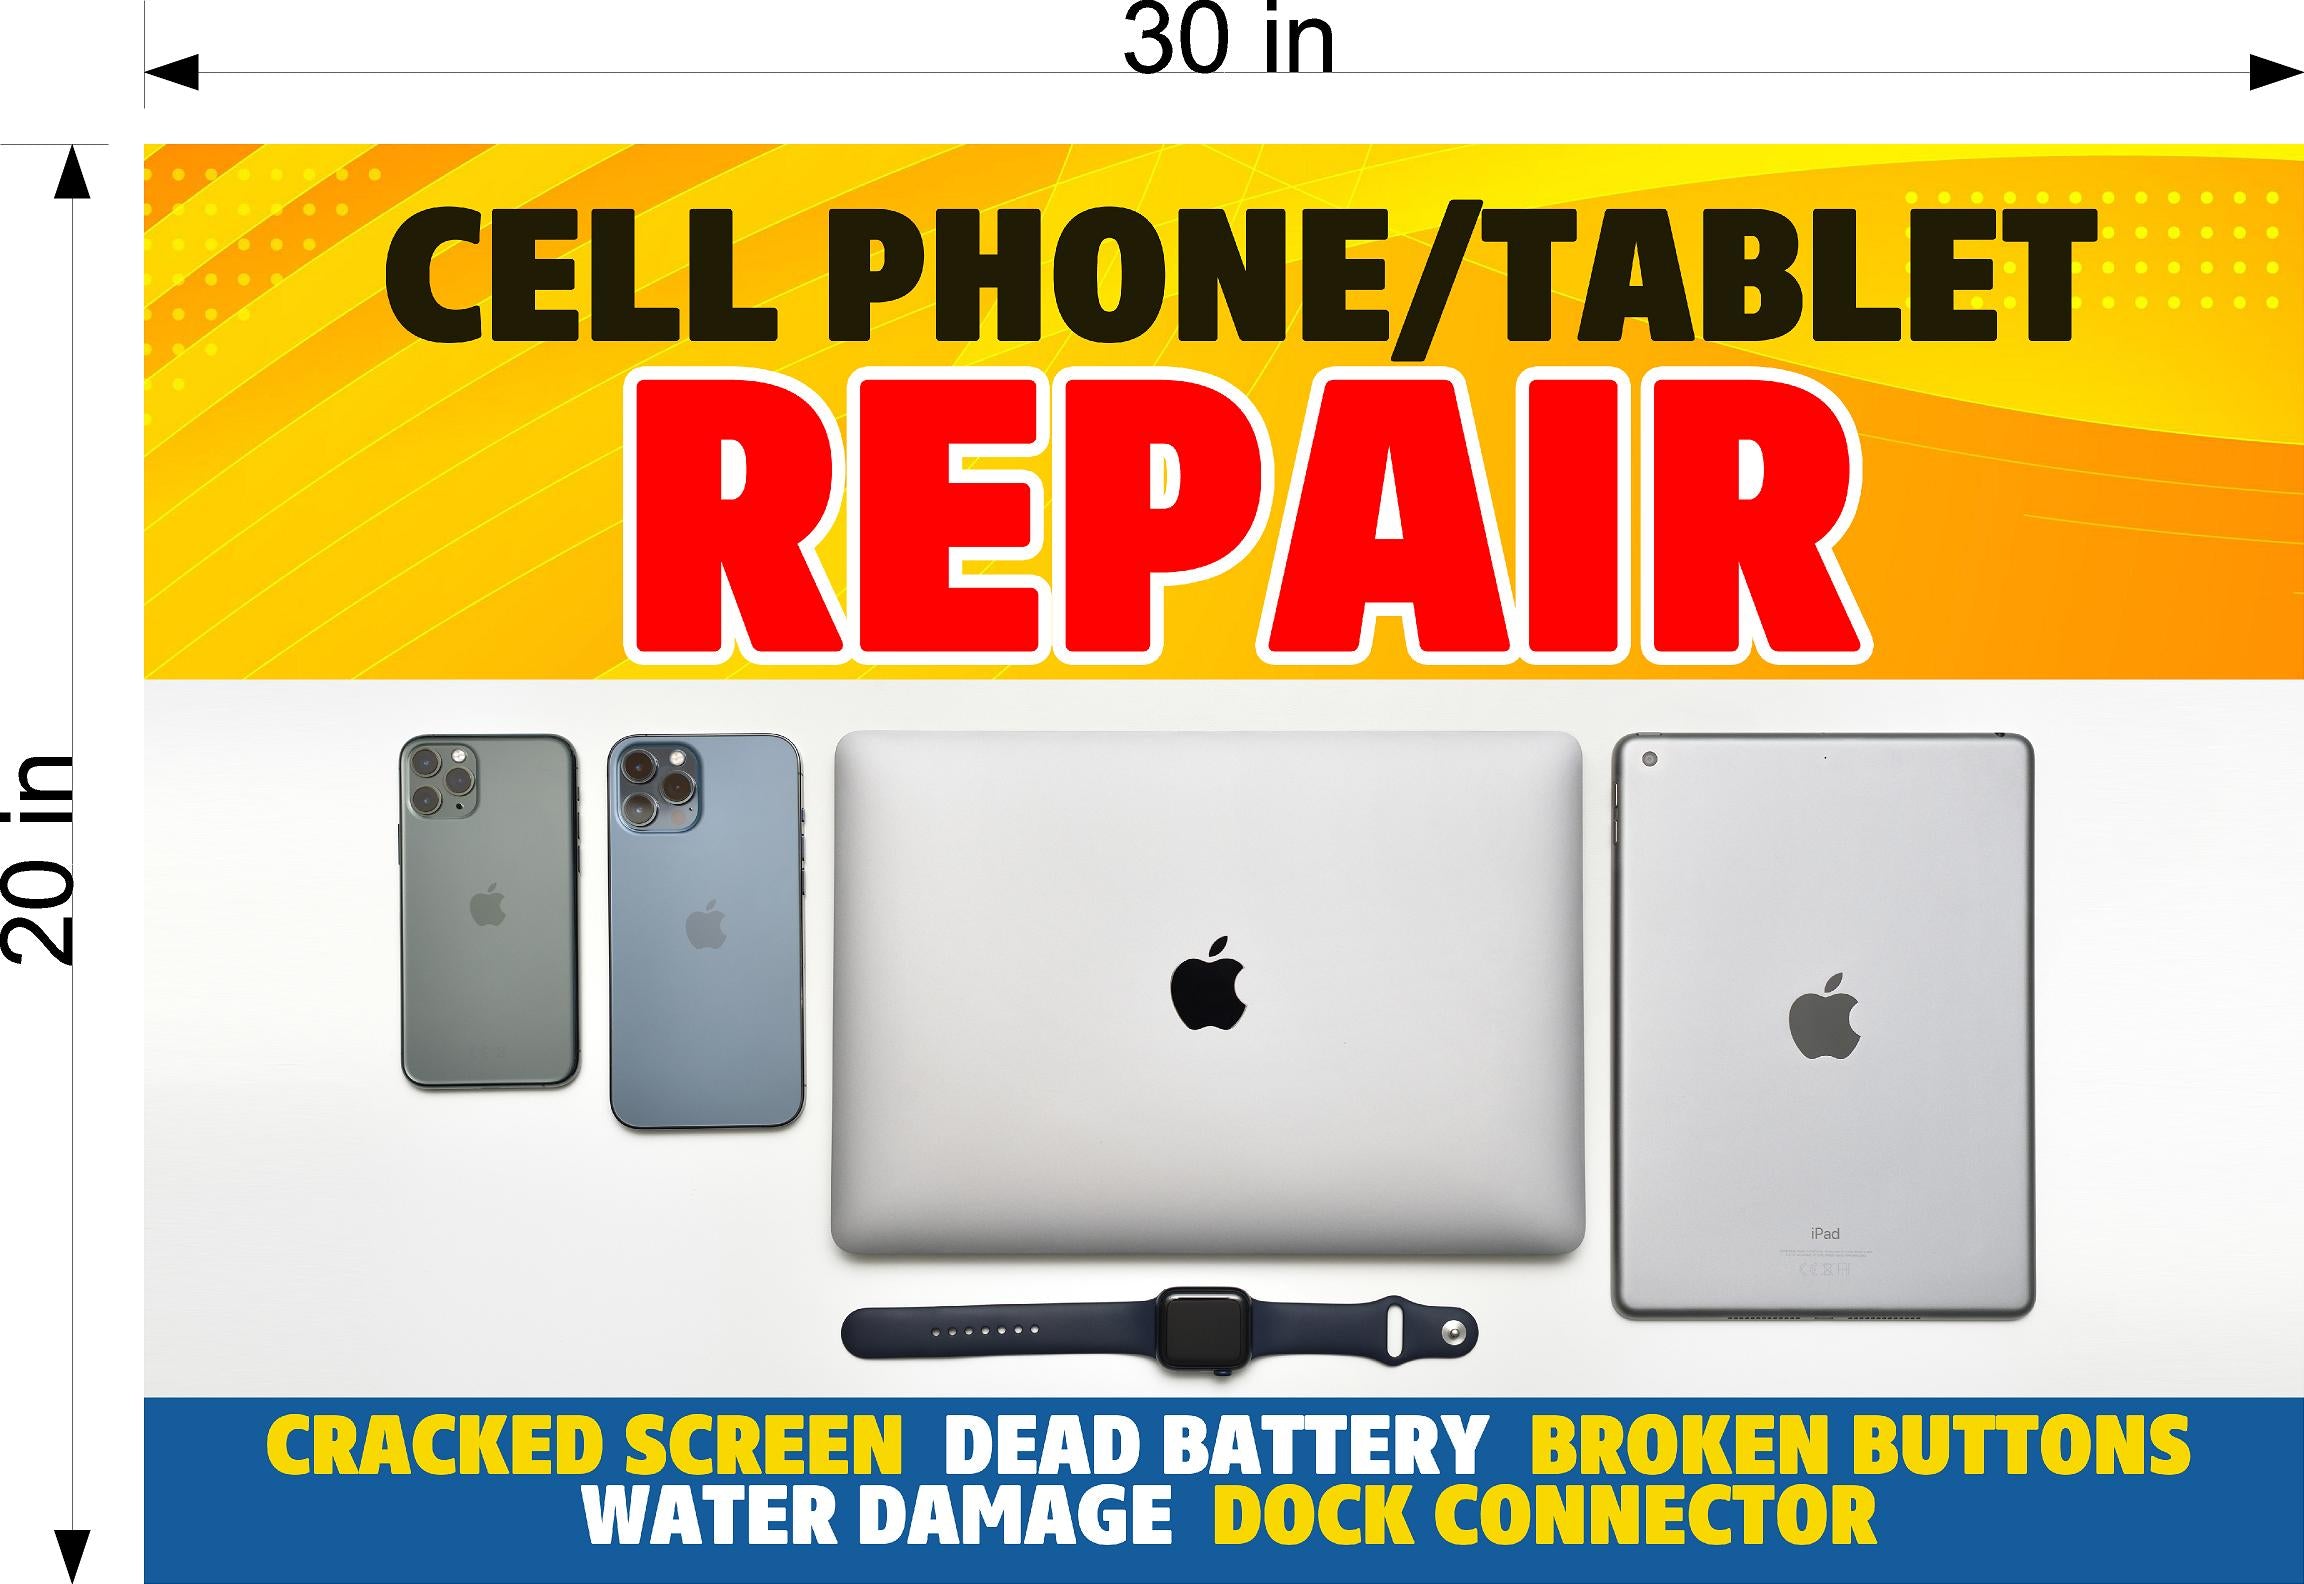 Phone Repair 09 Photo-Realistic Paper Poster Premium Interior Inside Sign Fix Smartphone buy Cell Computer Wall Window Non-Laminated Horizontal